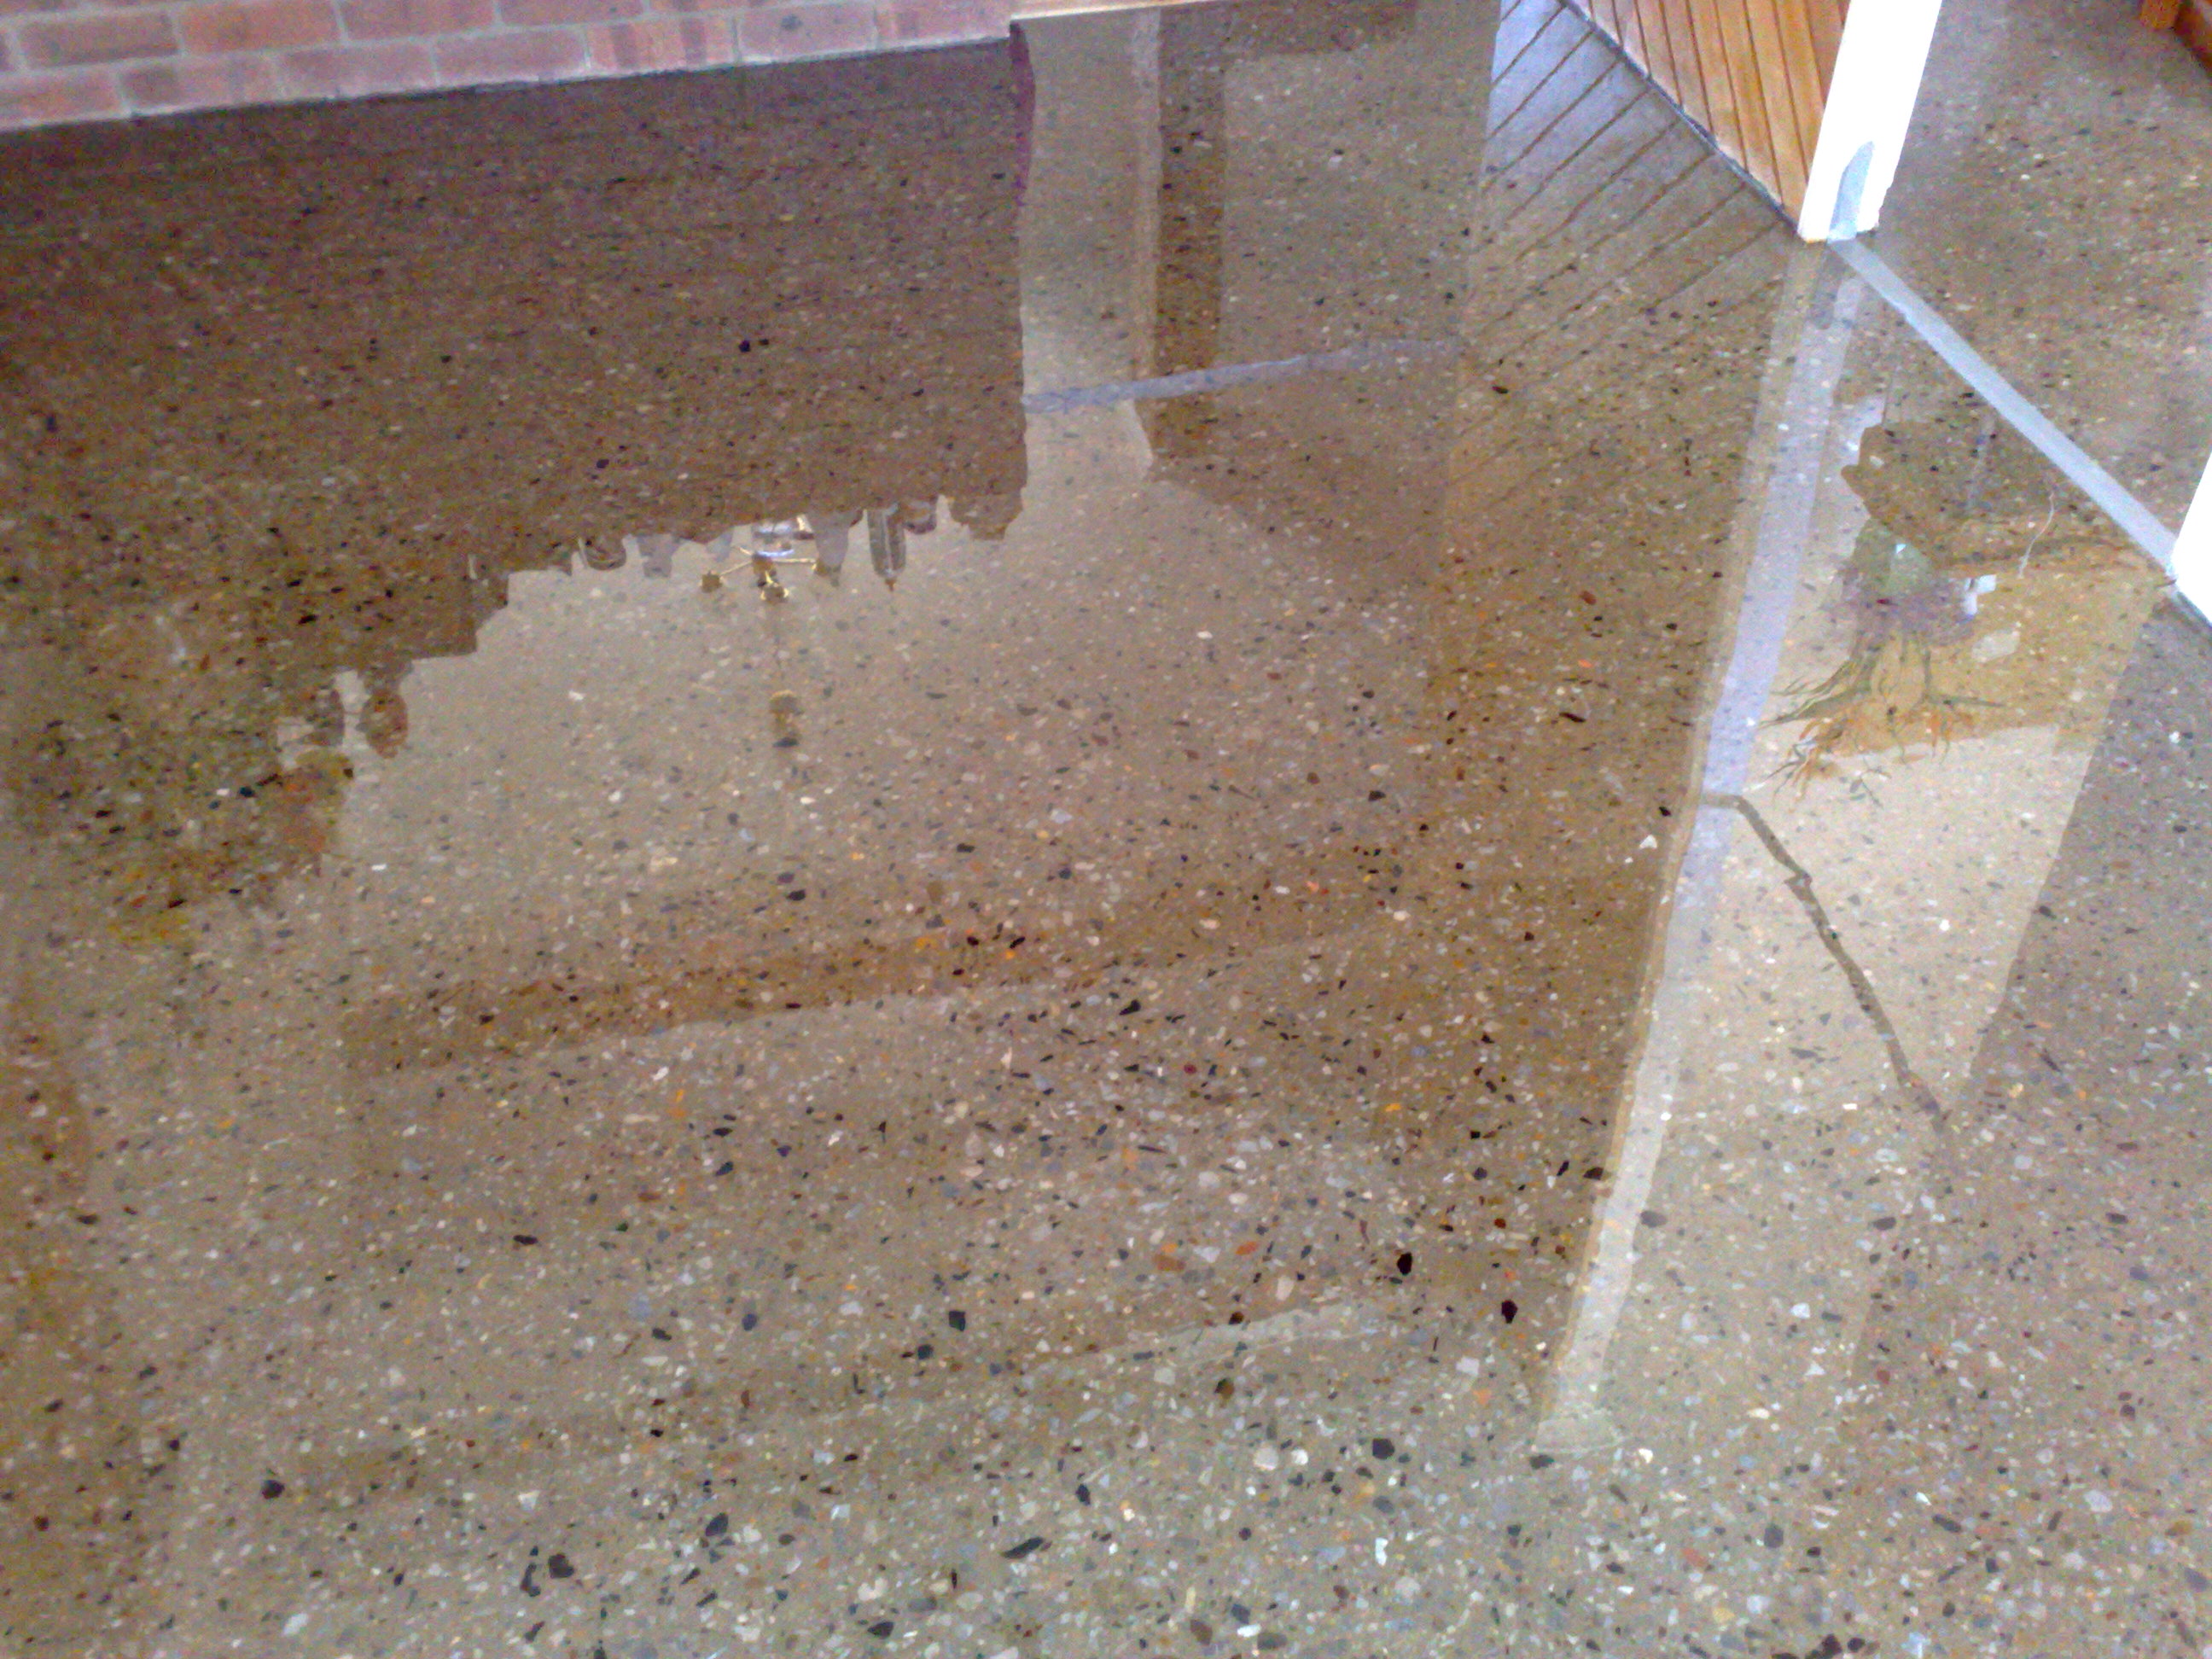 A residential floor showing the polished concrete look.